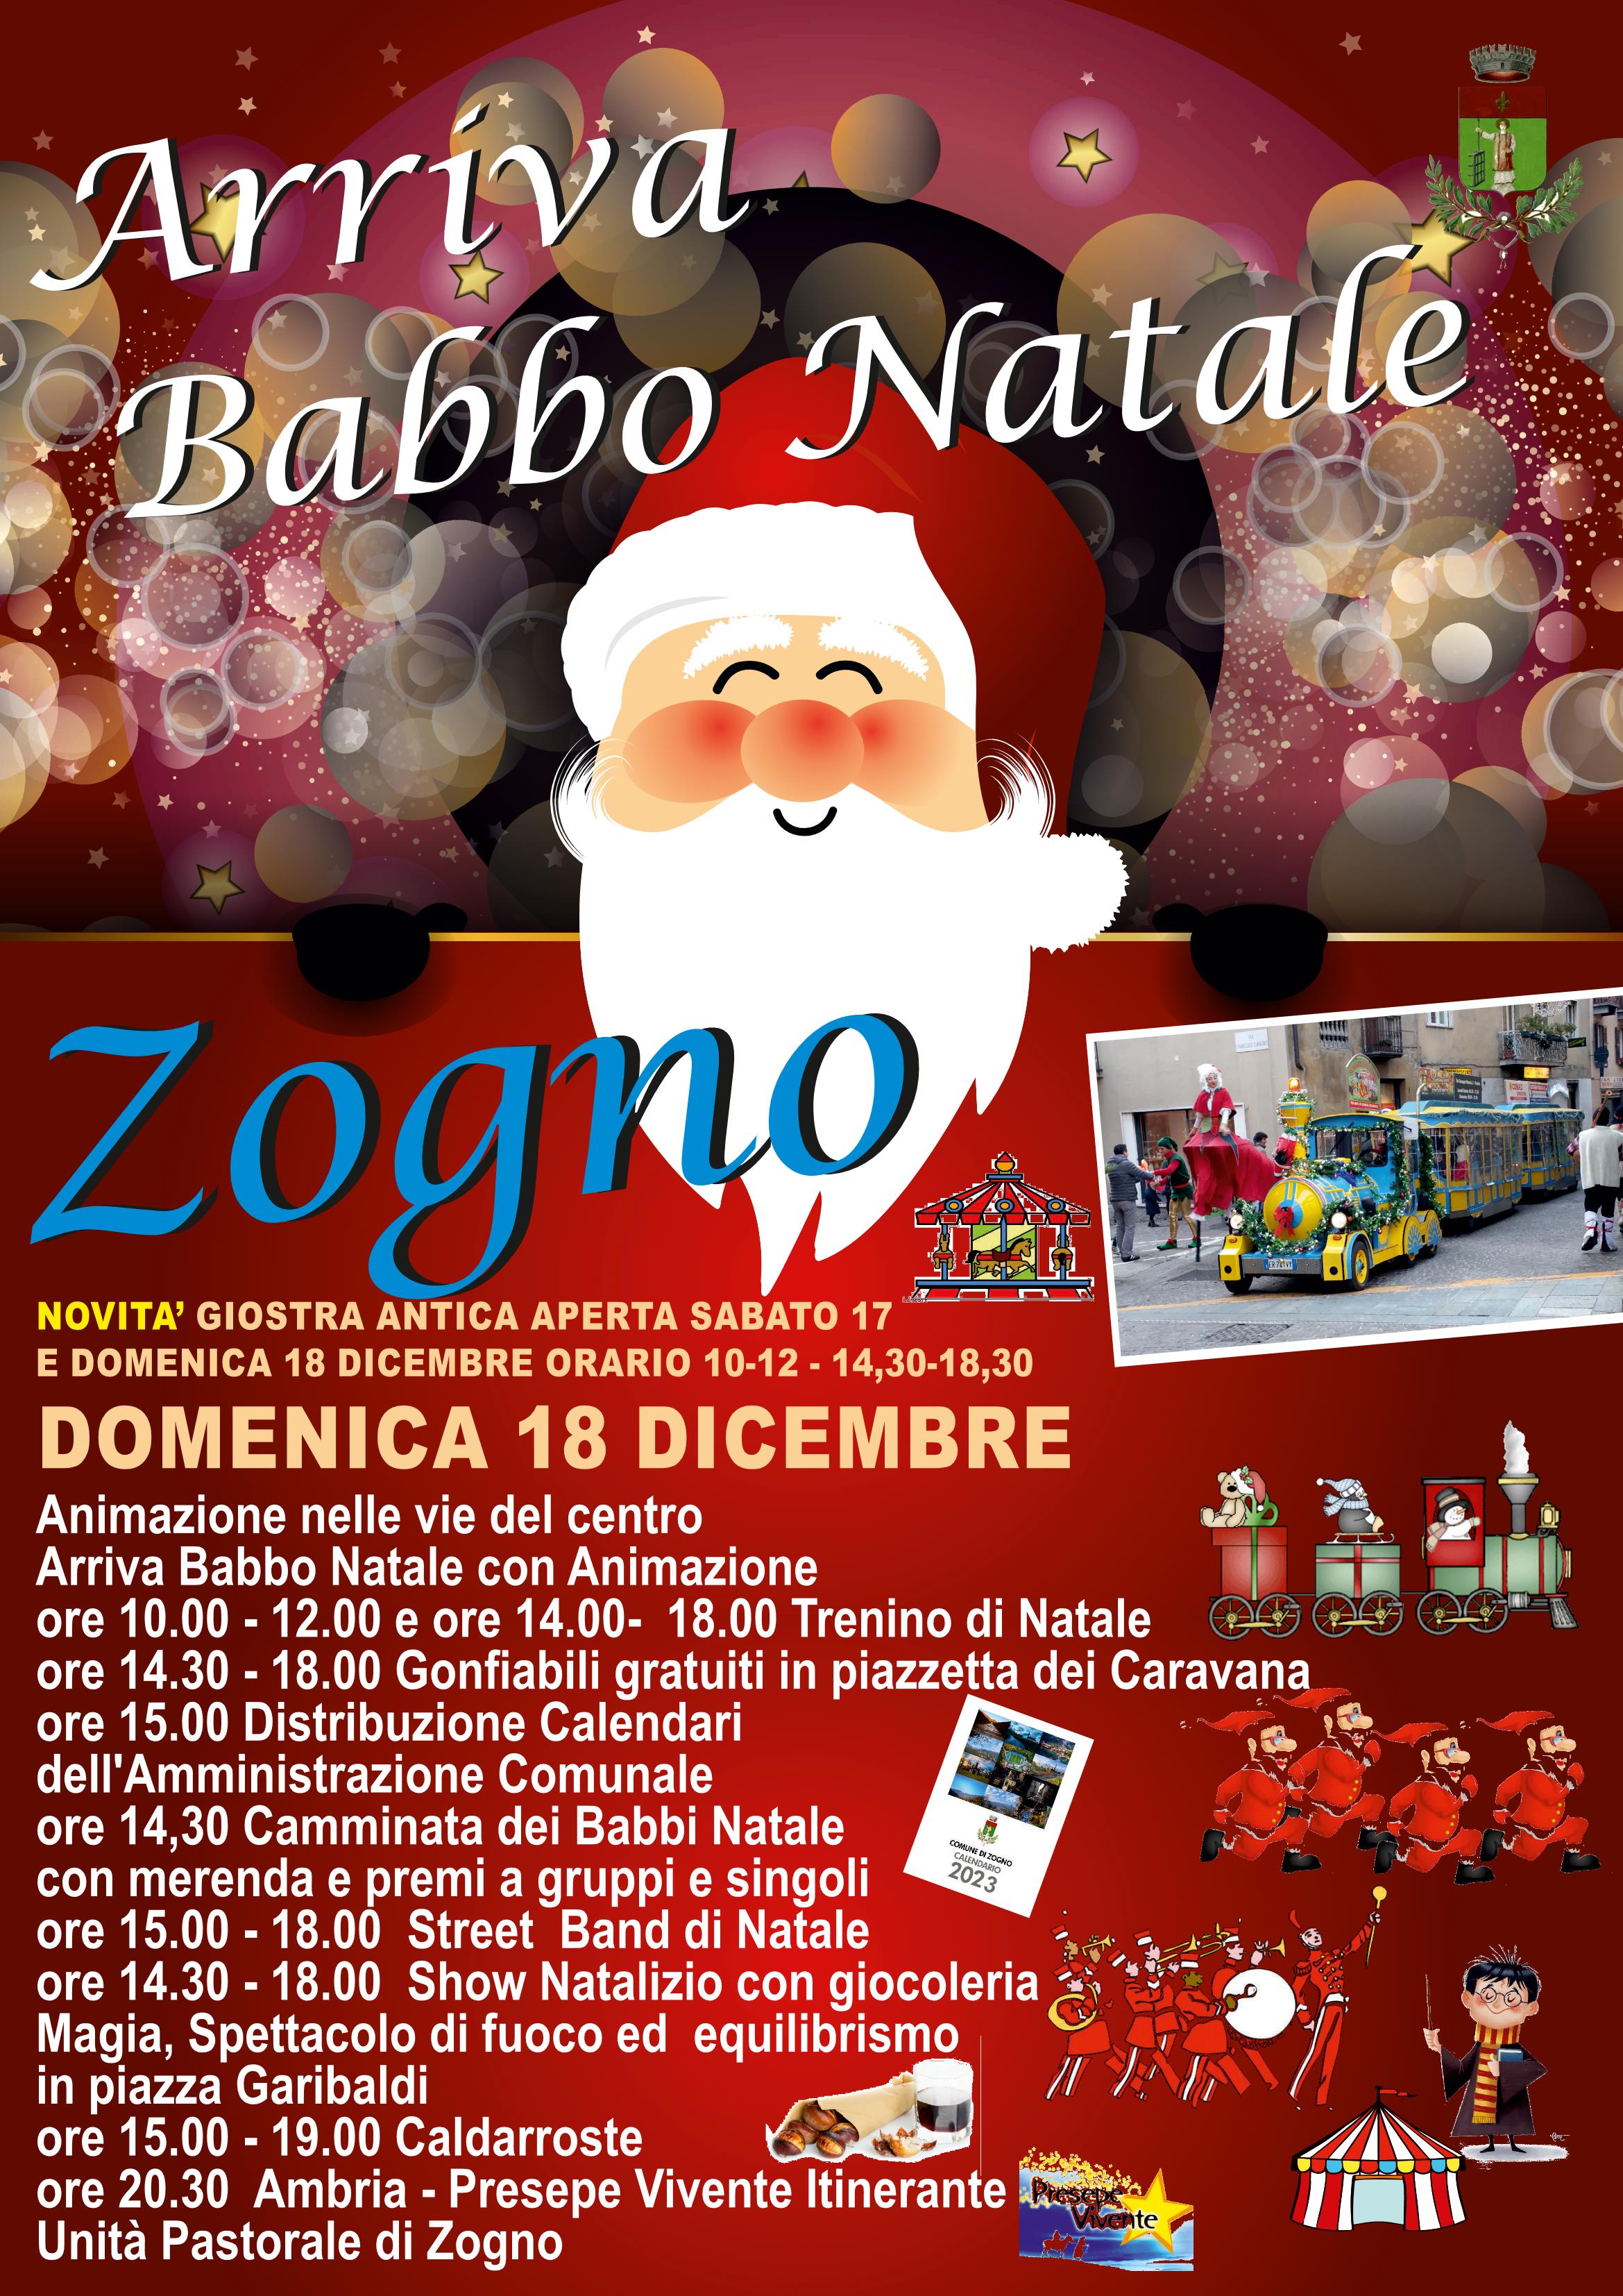 arriva babbo natale 2022-1_Page_1